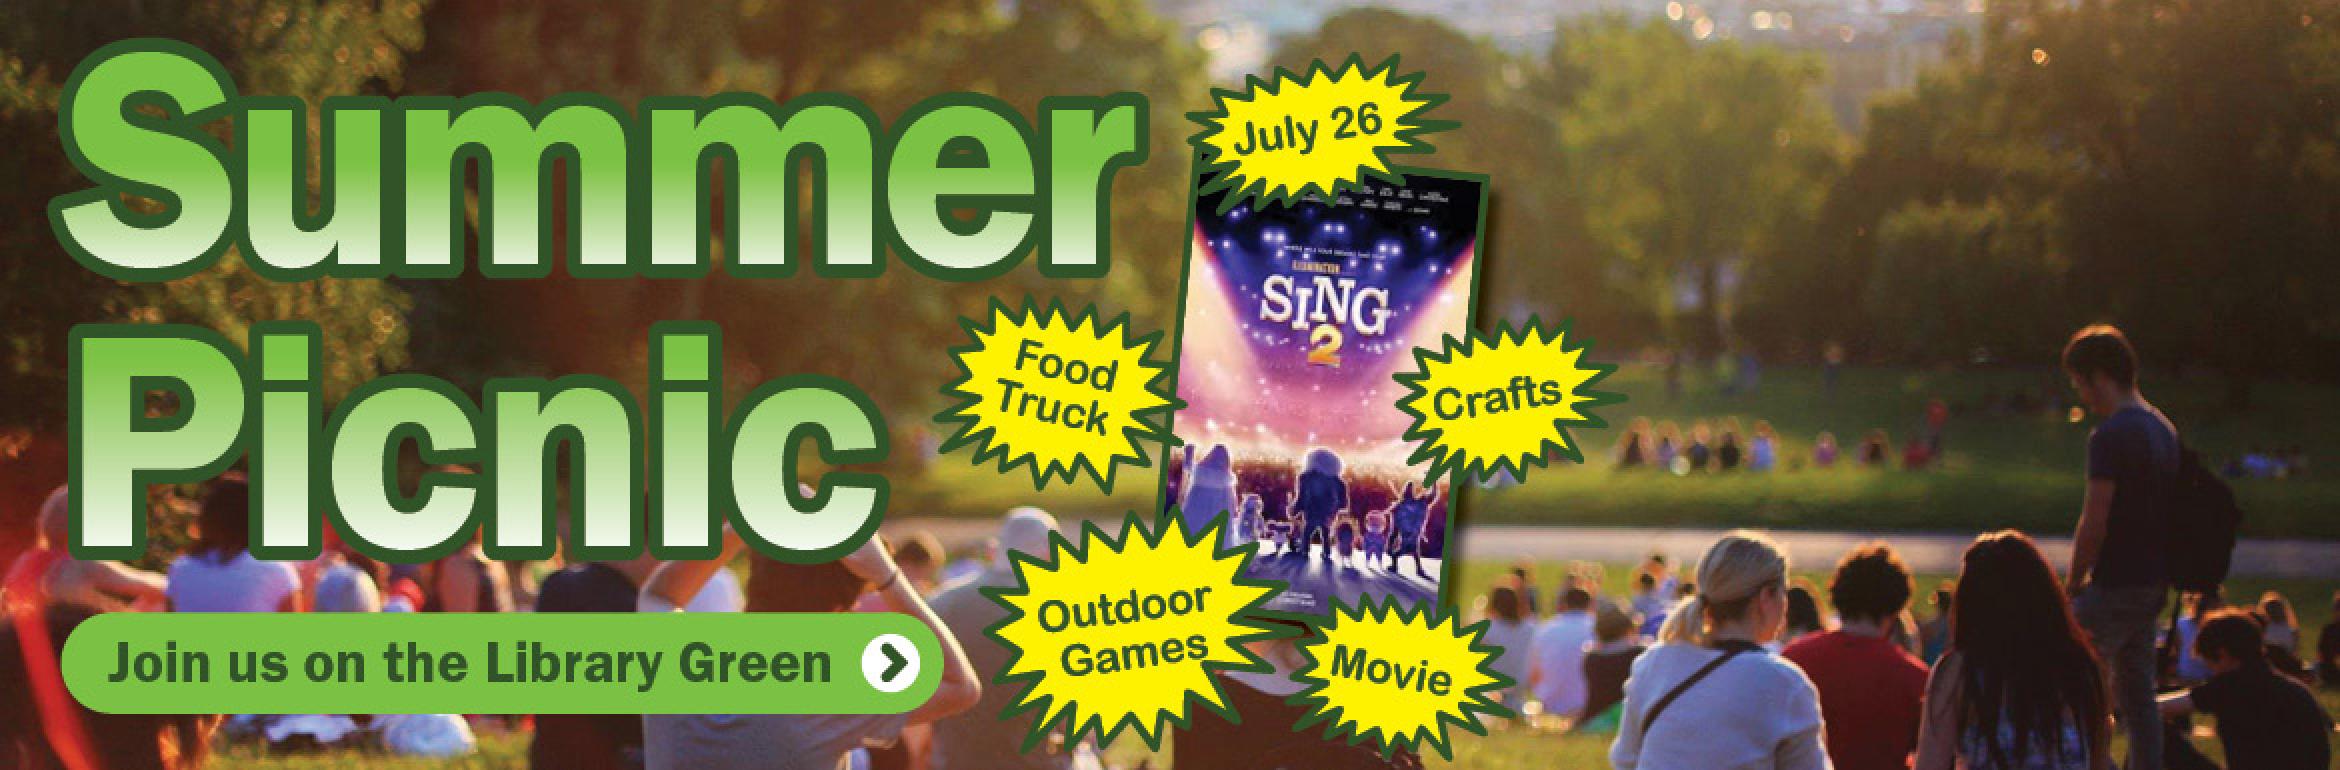 Summer Picnic. Join us on the Library Green. July 26. Food Truck. Outdoor Games. Crafts. Movie (Sing 2).